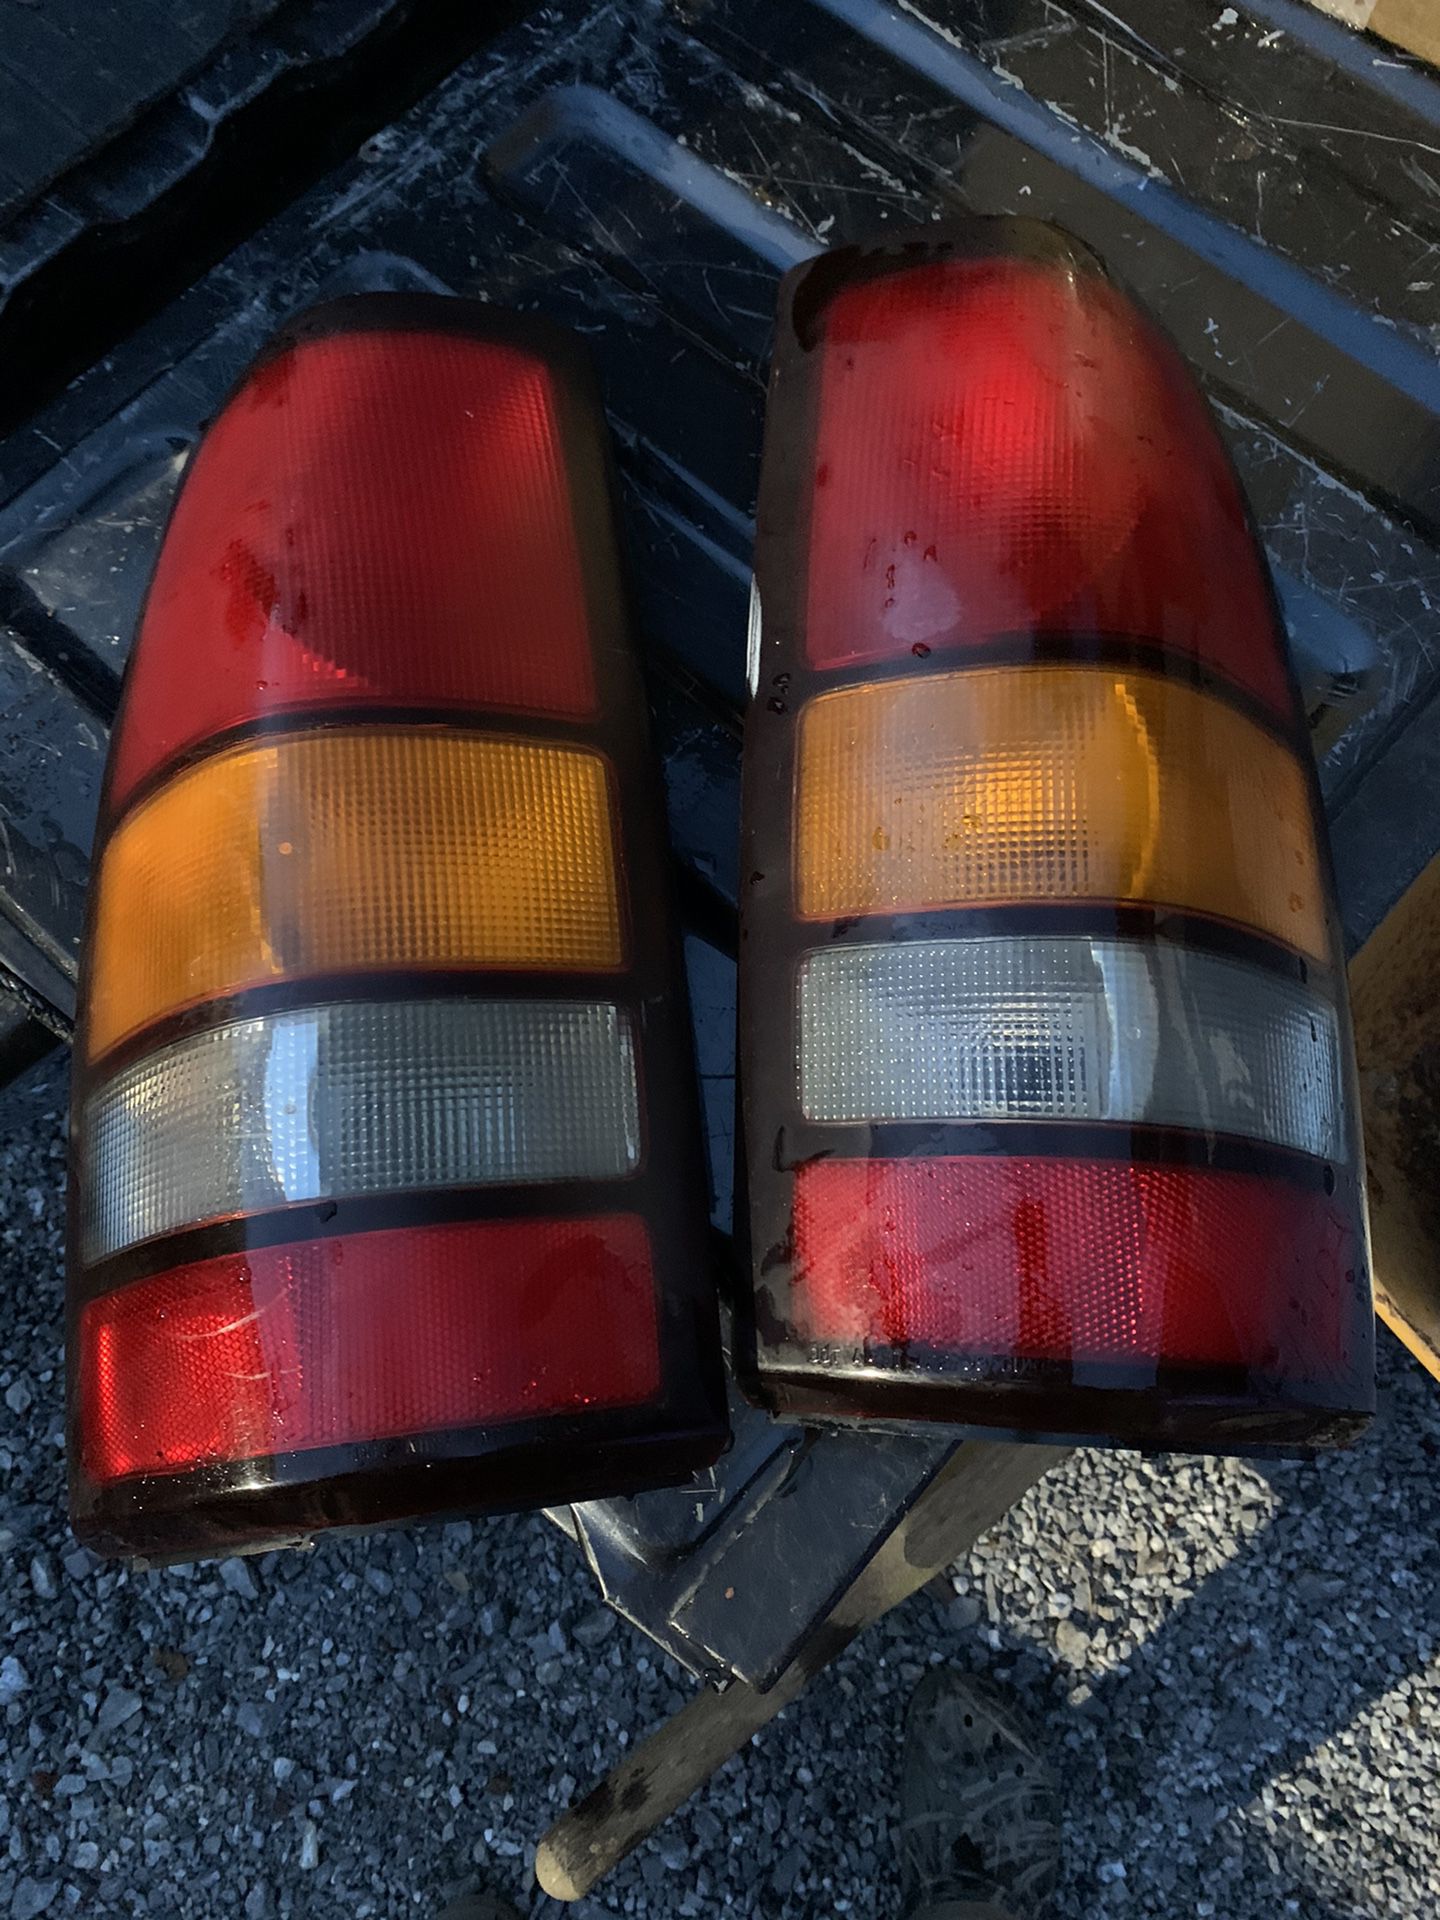 99-05 Gmc Or Chevy Taillights